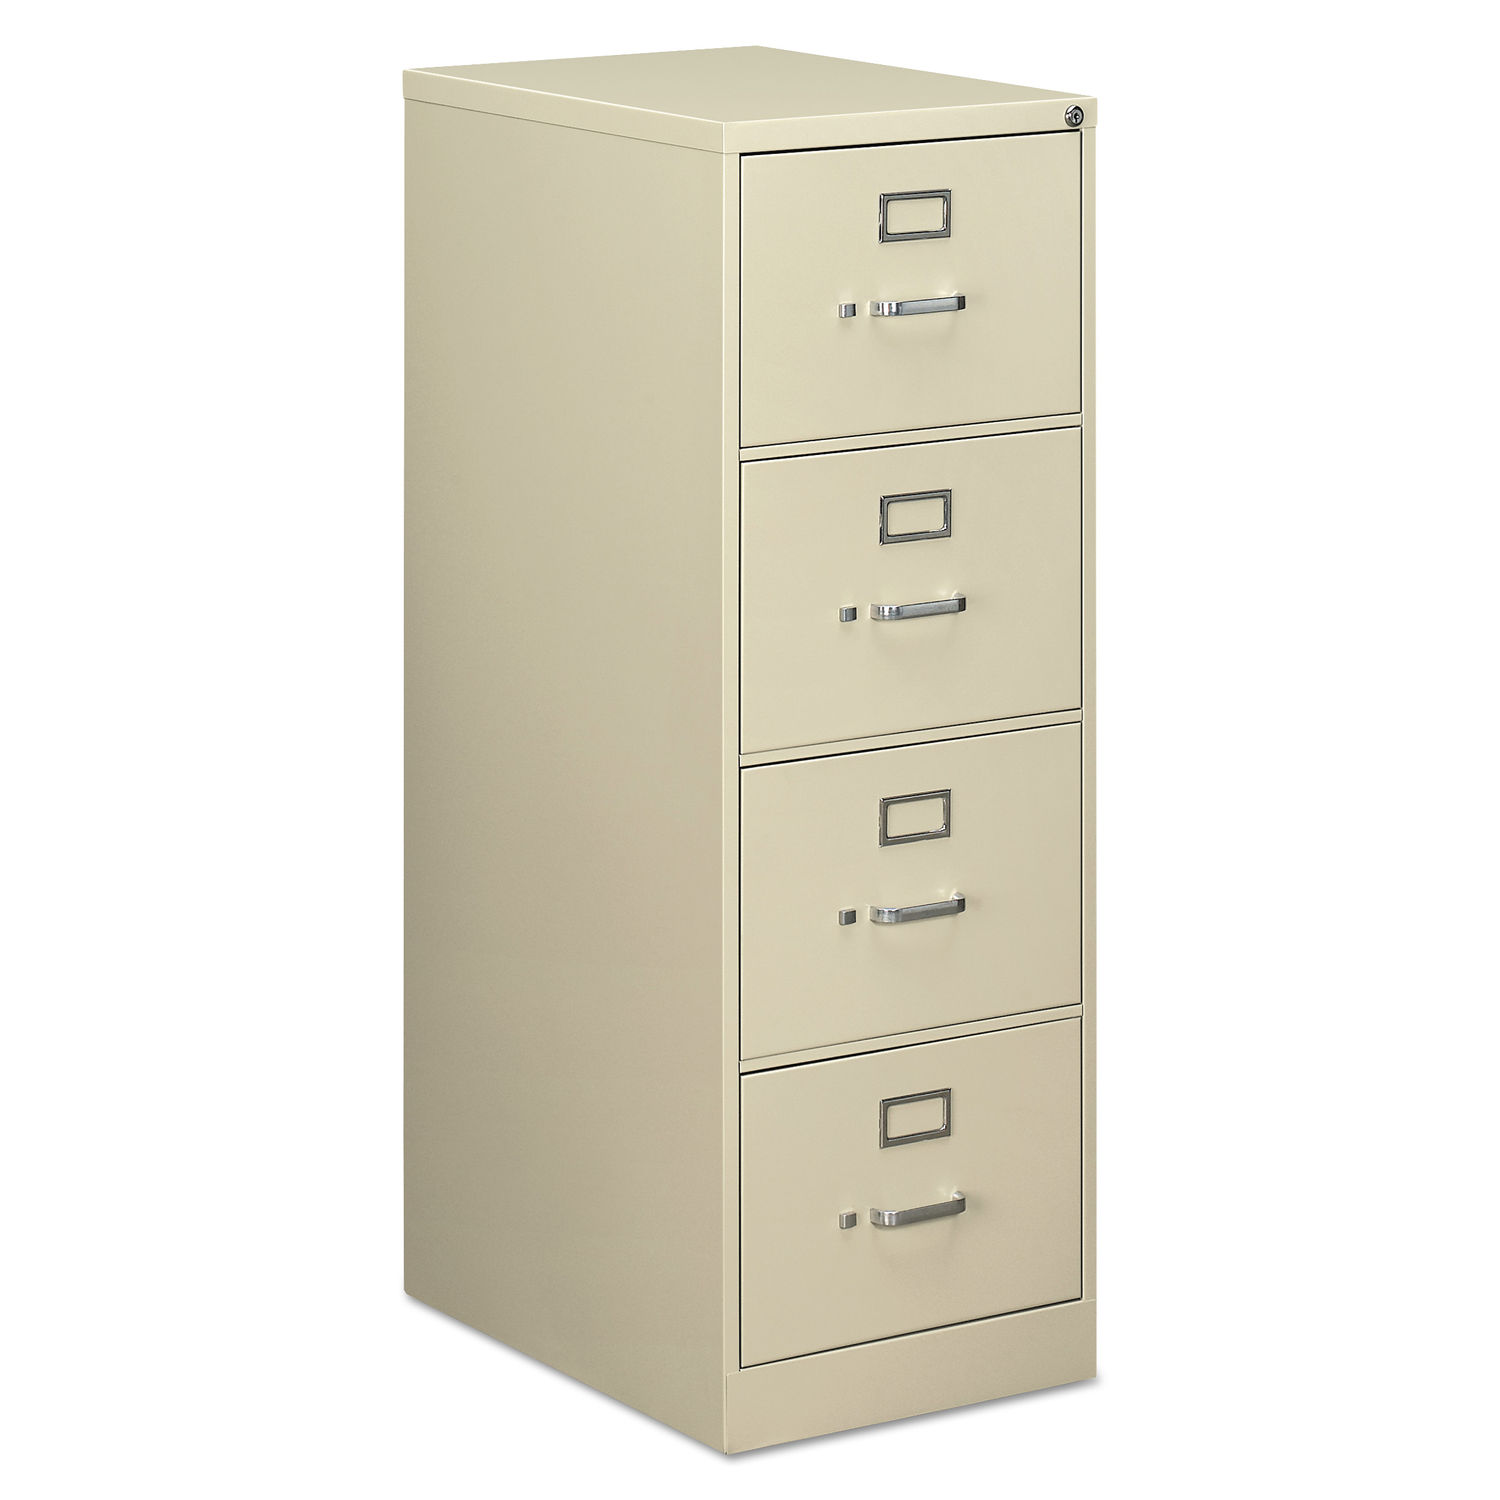 Economy Vertical File 4 Legal-Size File Drawers, Putty, 18" x 25" x 52"